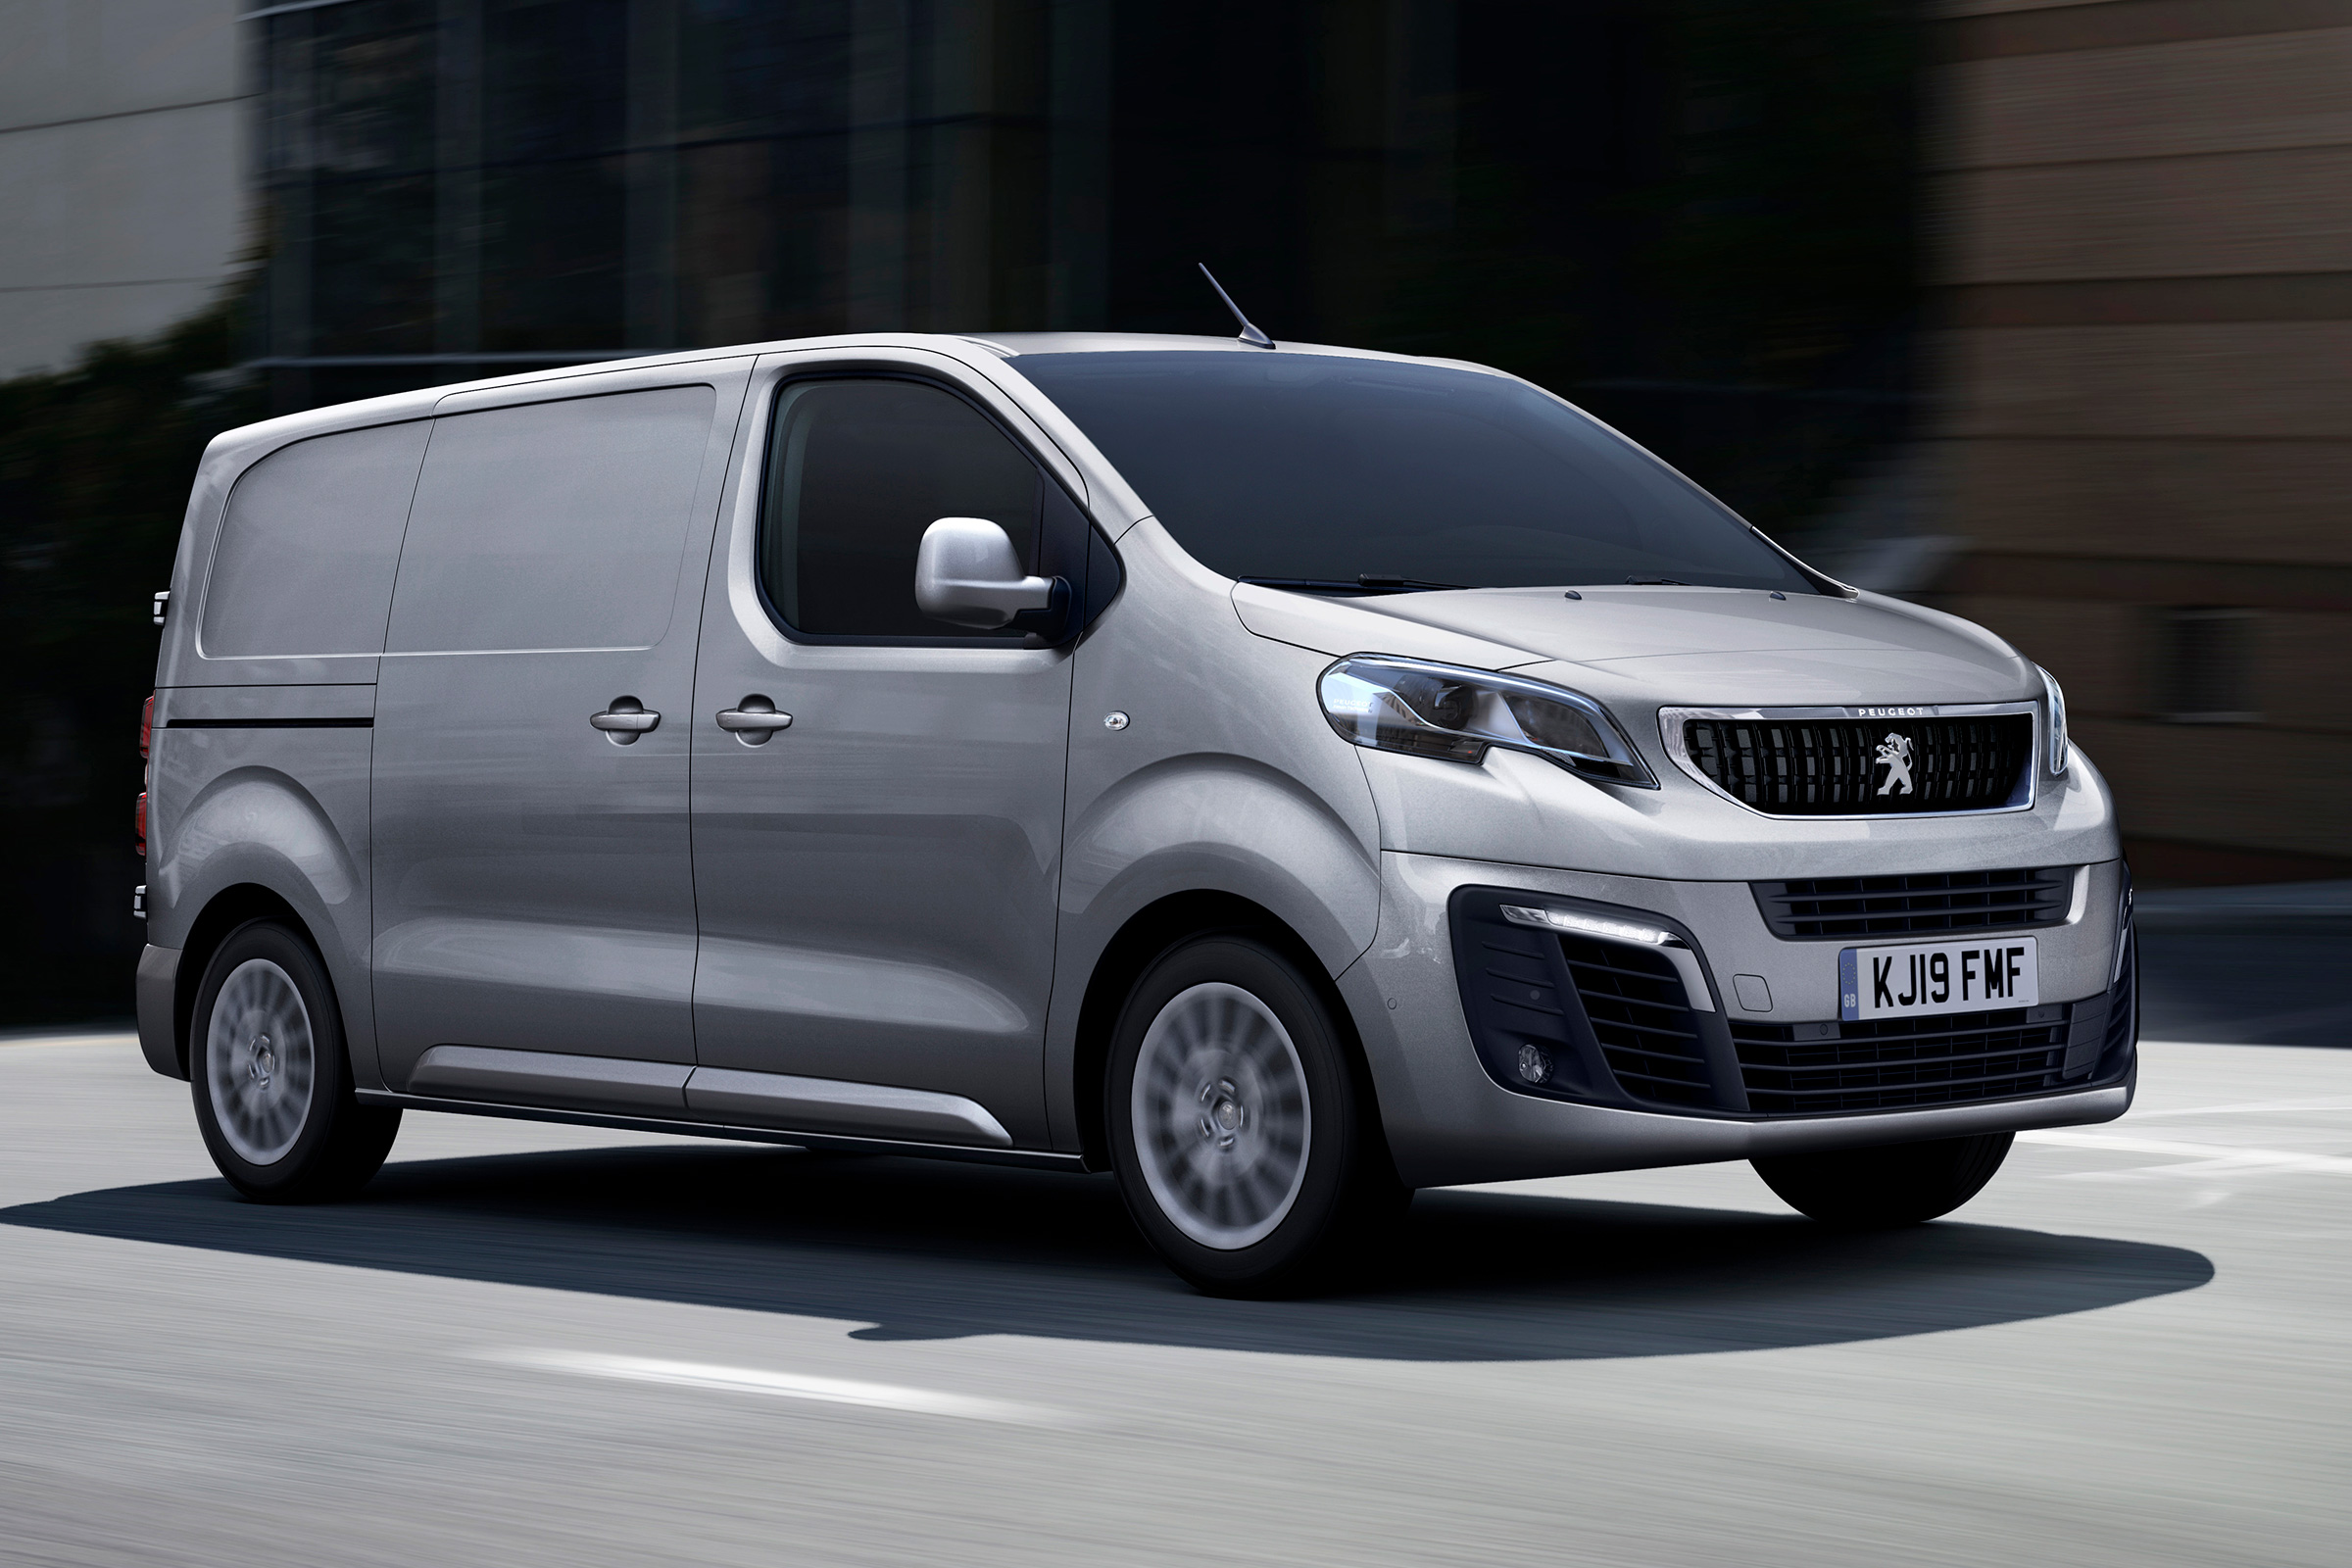 2019 Peugeot Expert trim and engine updates | Auto Express